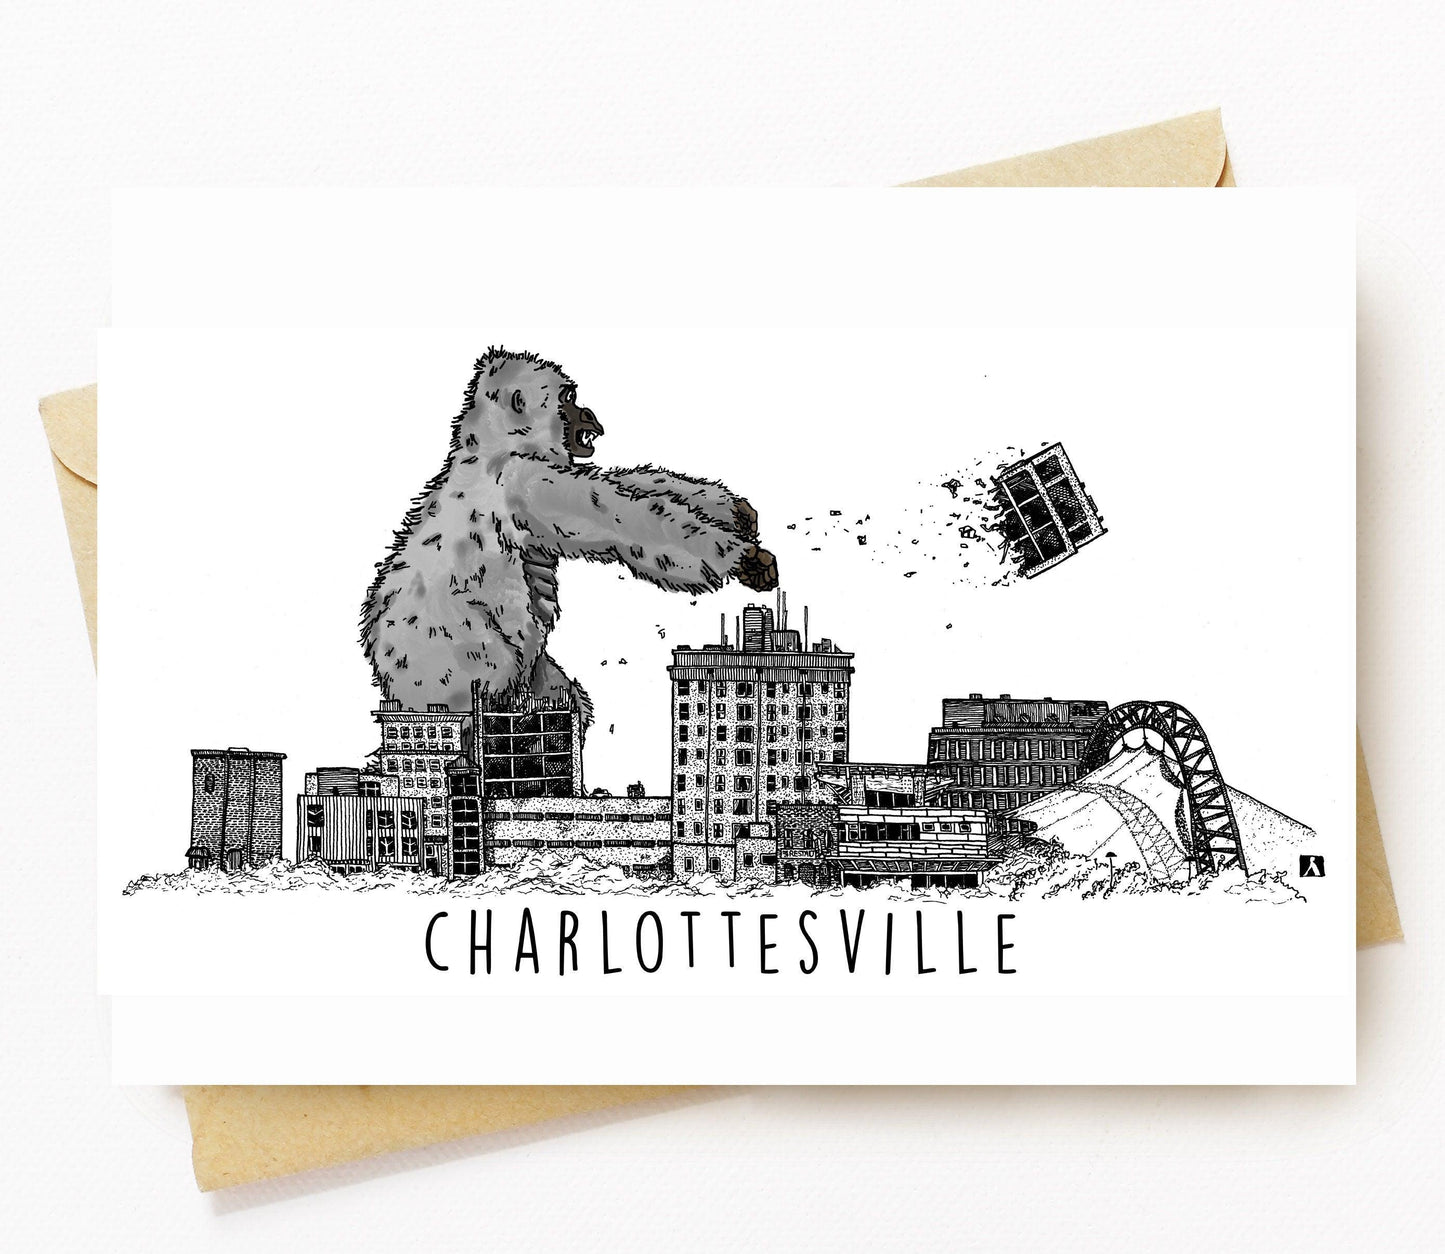 BellavanceInk: Greeting Card With King Kong Attacking The Charlottesville Landmark Hotel 5 x 7 Inches - BellavanceInk